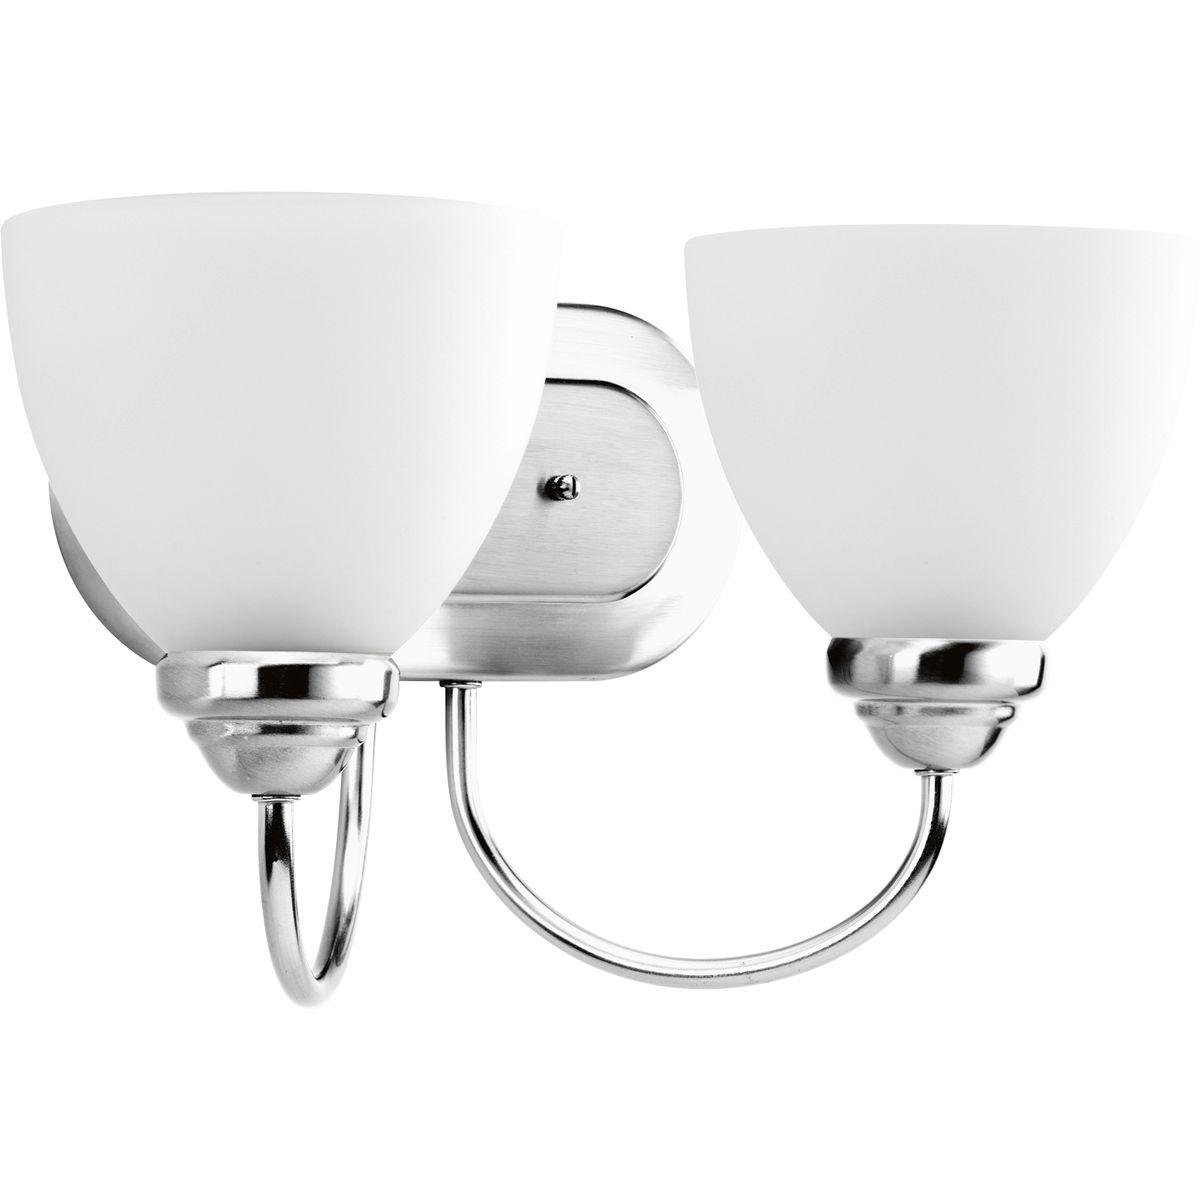 Hubbell P2915-15 The Heart Collection possesses a smart simplicity to complement today's home. This two-light bath bracket includes etched glass shades to add distinction and provide pleasing illumination to any room. Versatile design permits installation of fixture facin